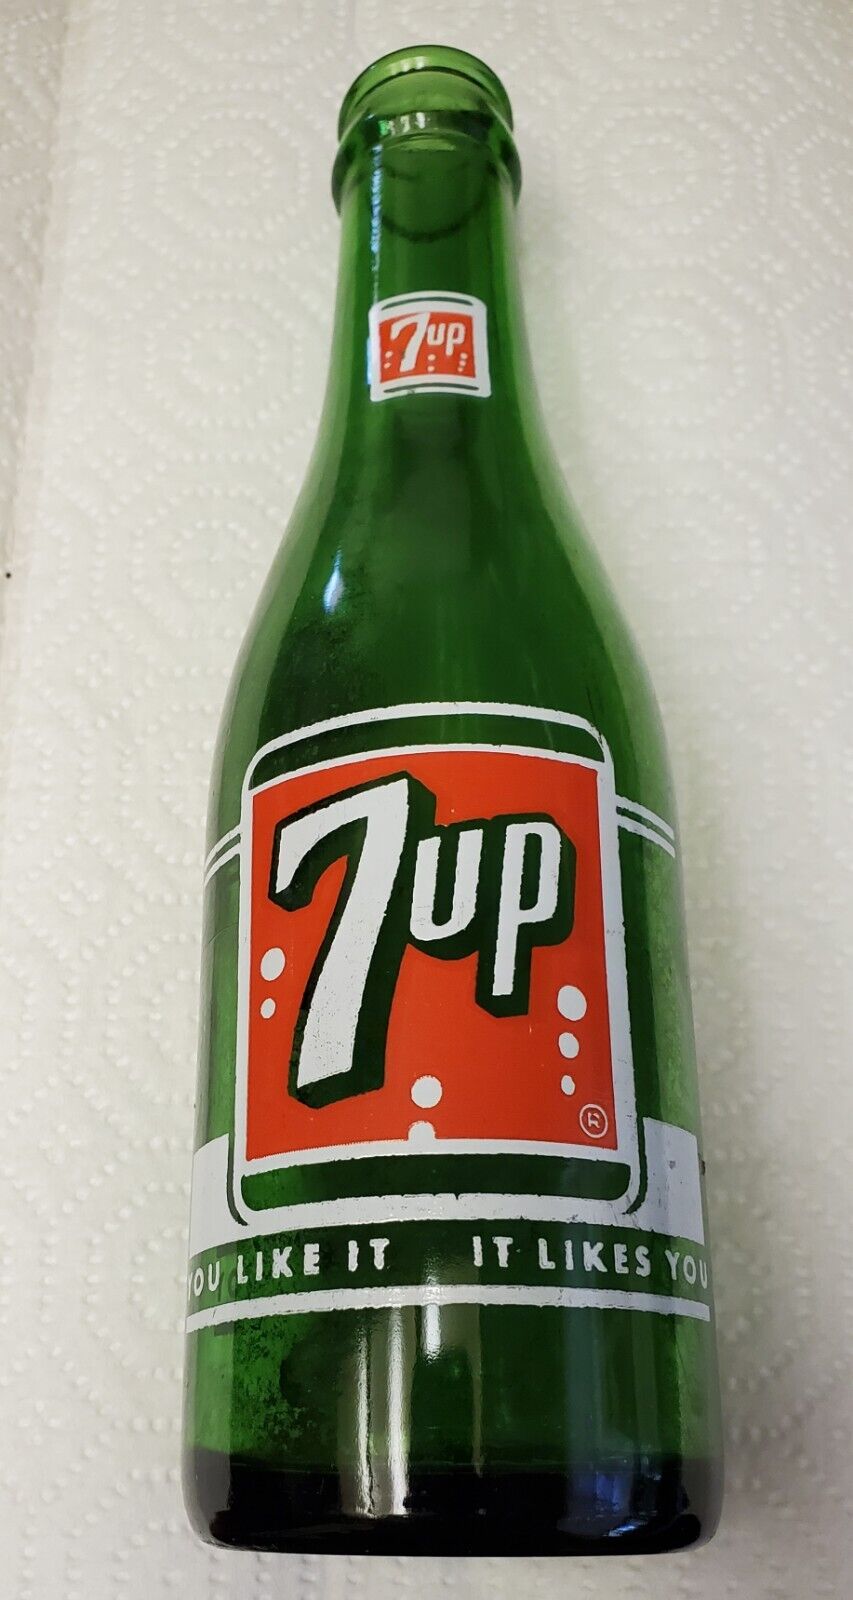 7 up green glass bottle 7oz Vintage * 1964 one year only *